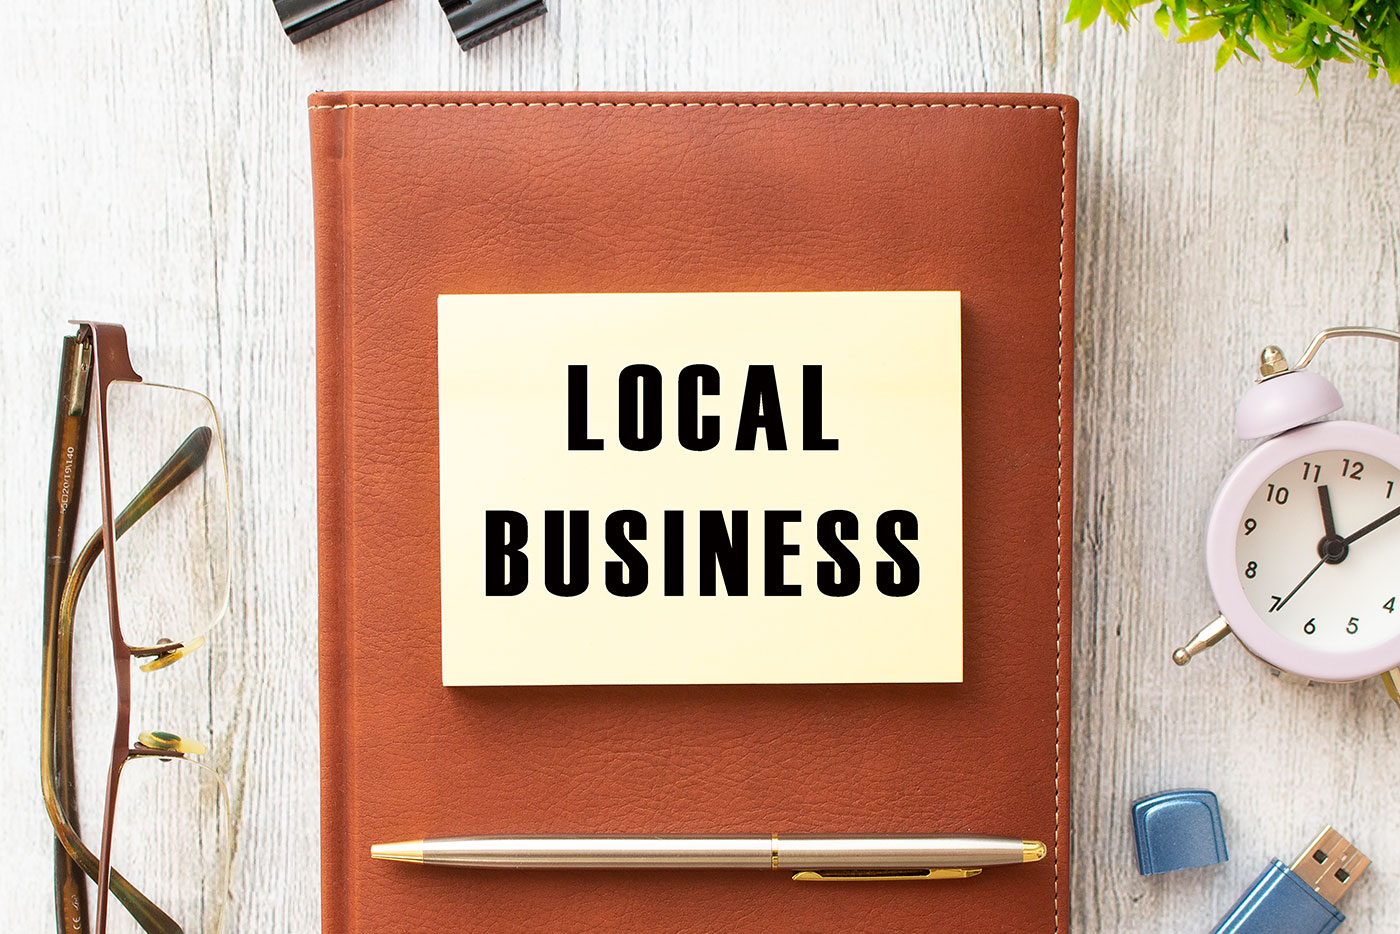 How to get local customers